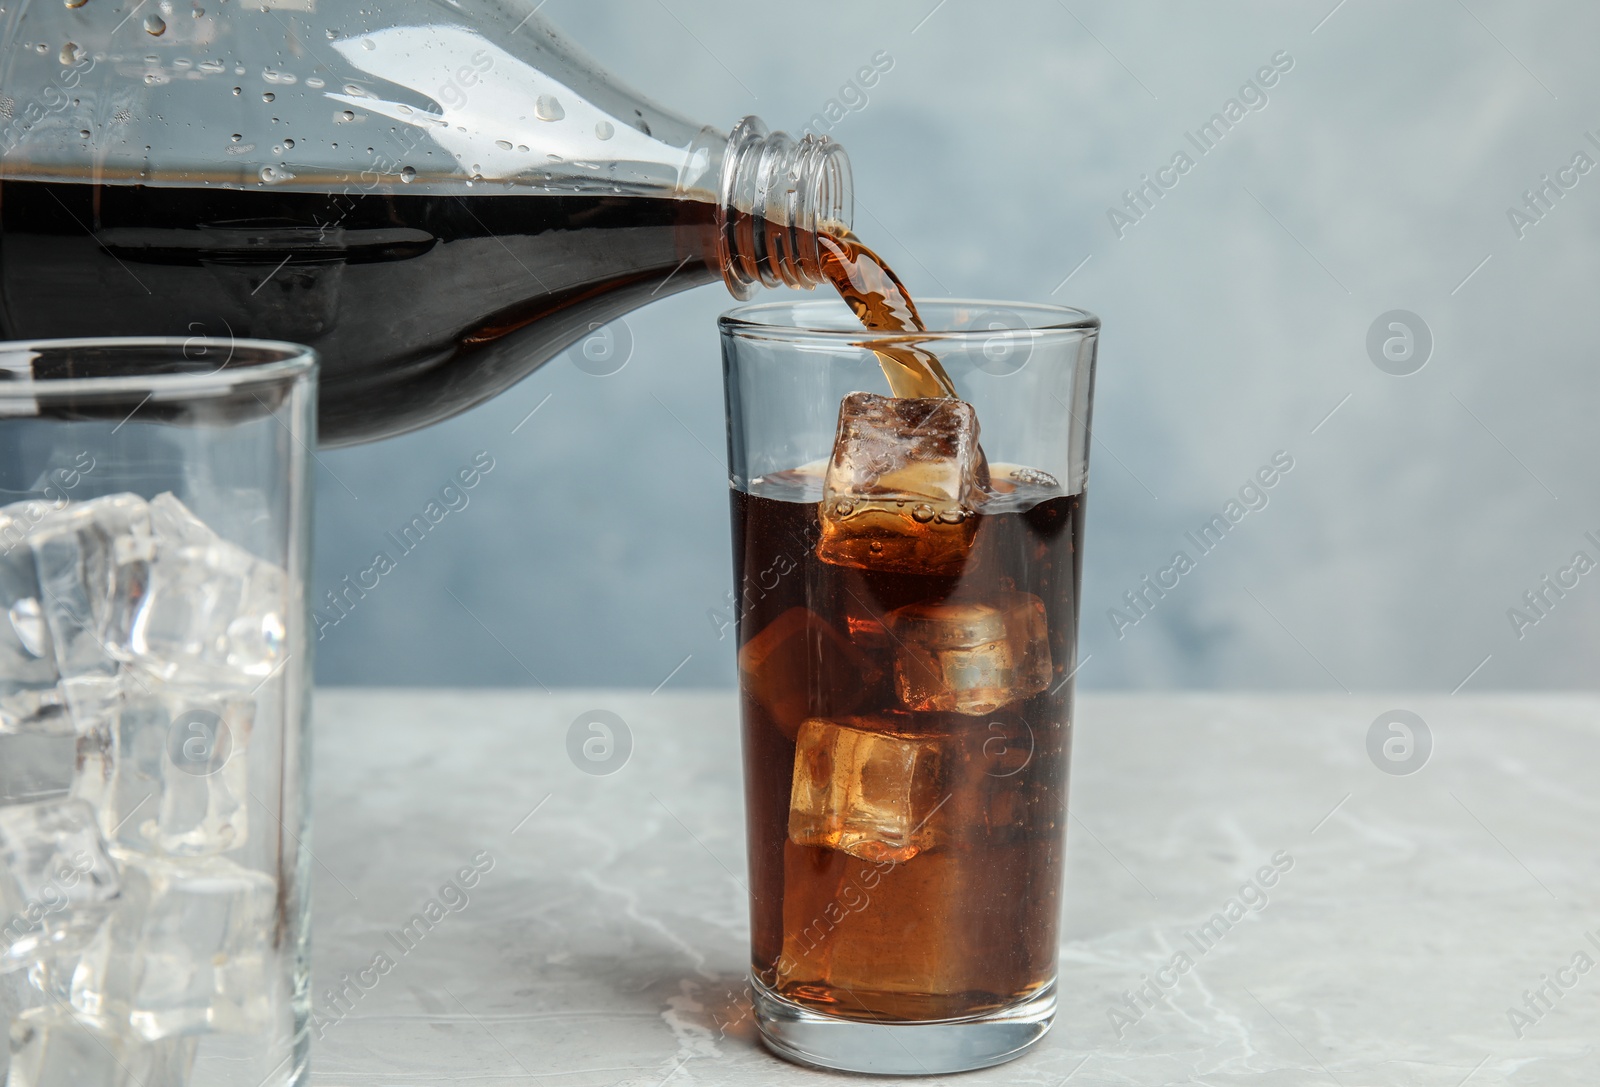 Photo of Pouring refreshing soda drink into glass on table against blue background